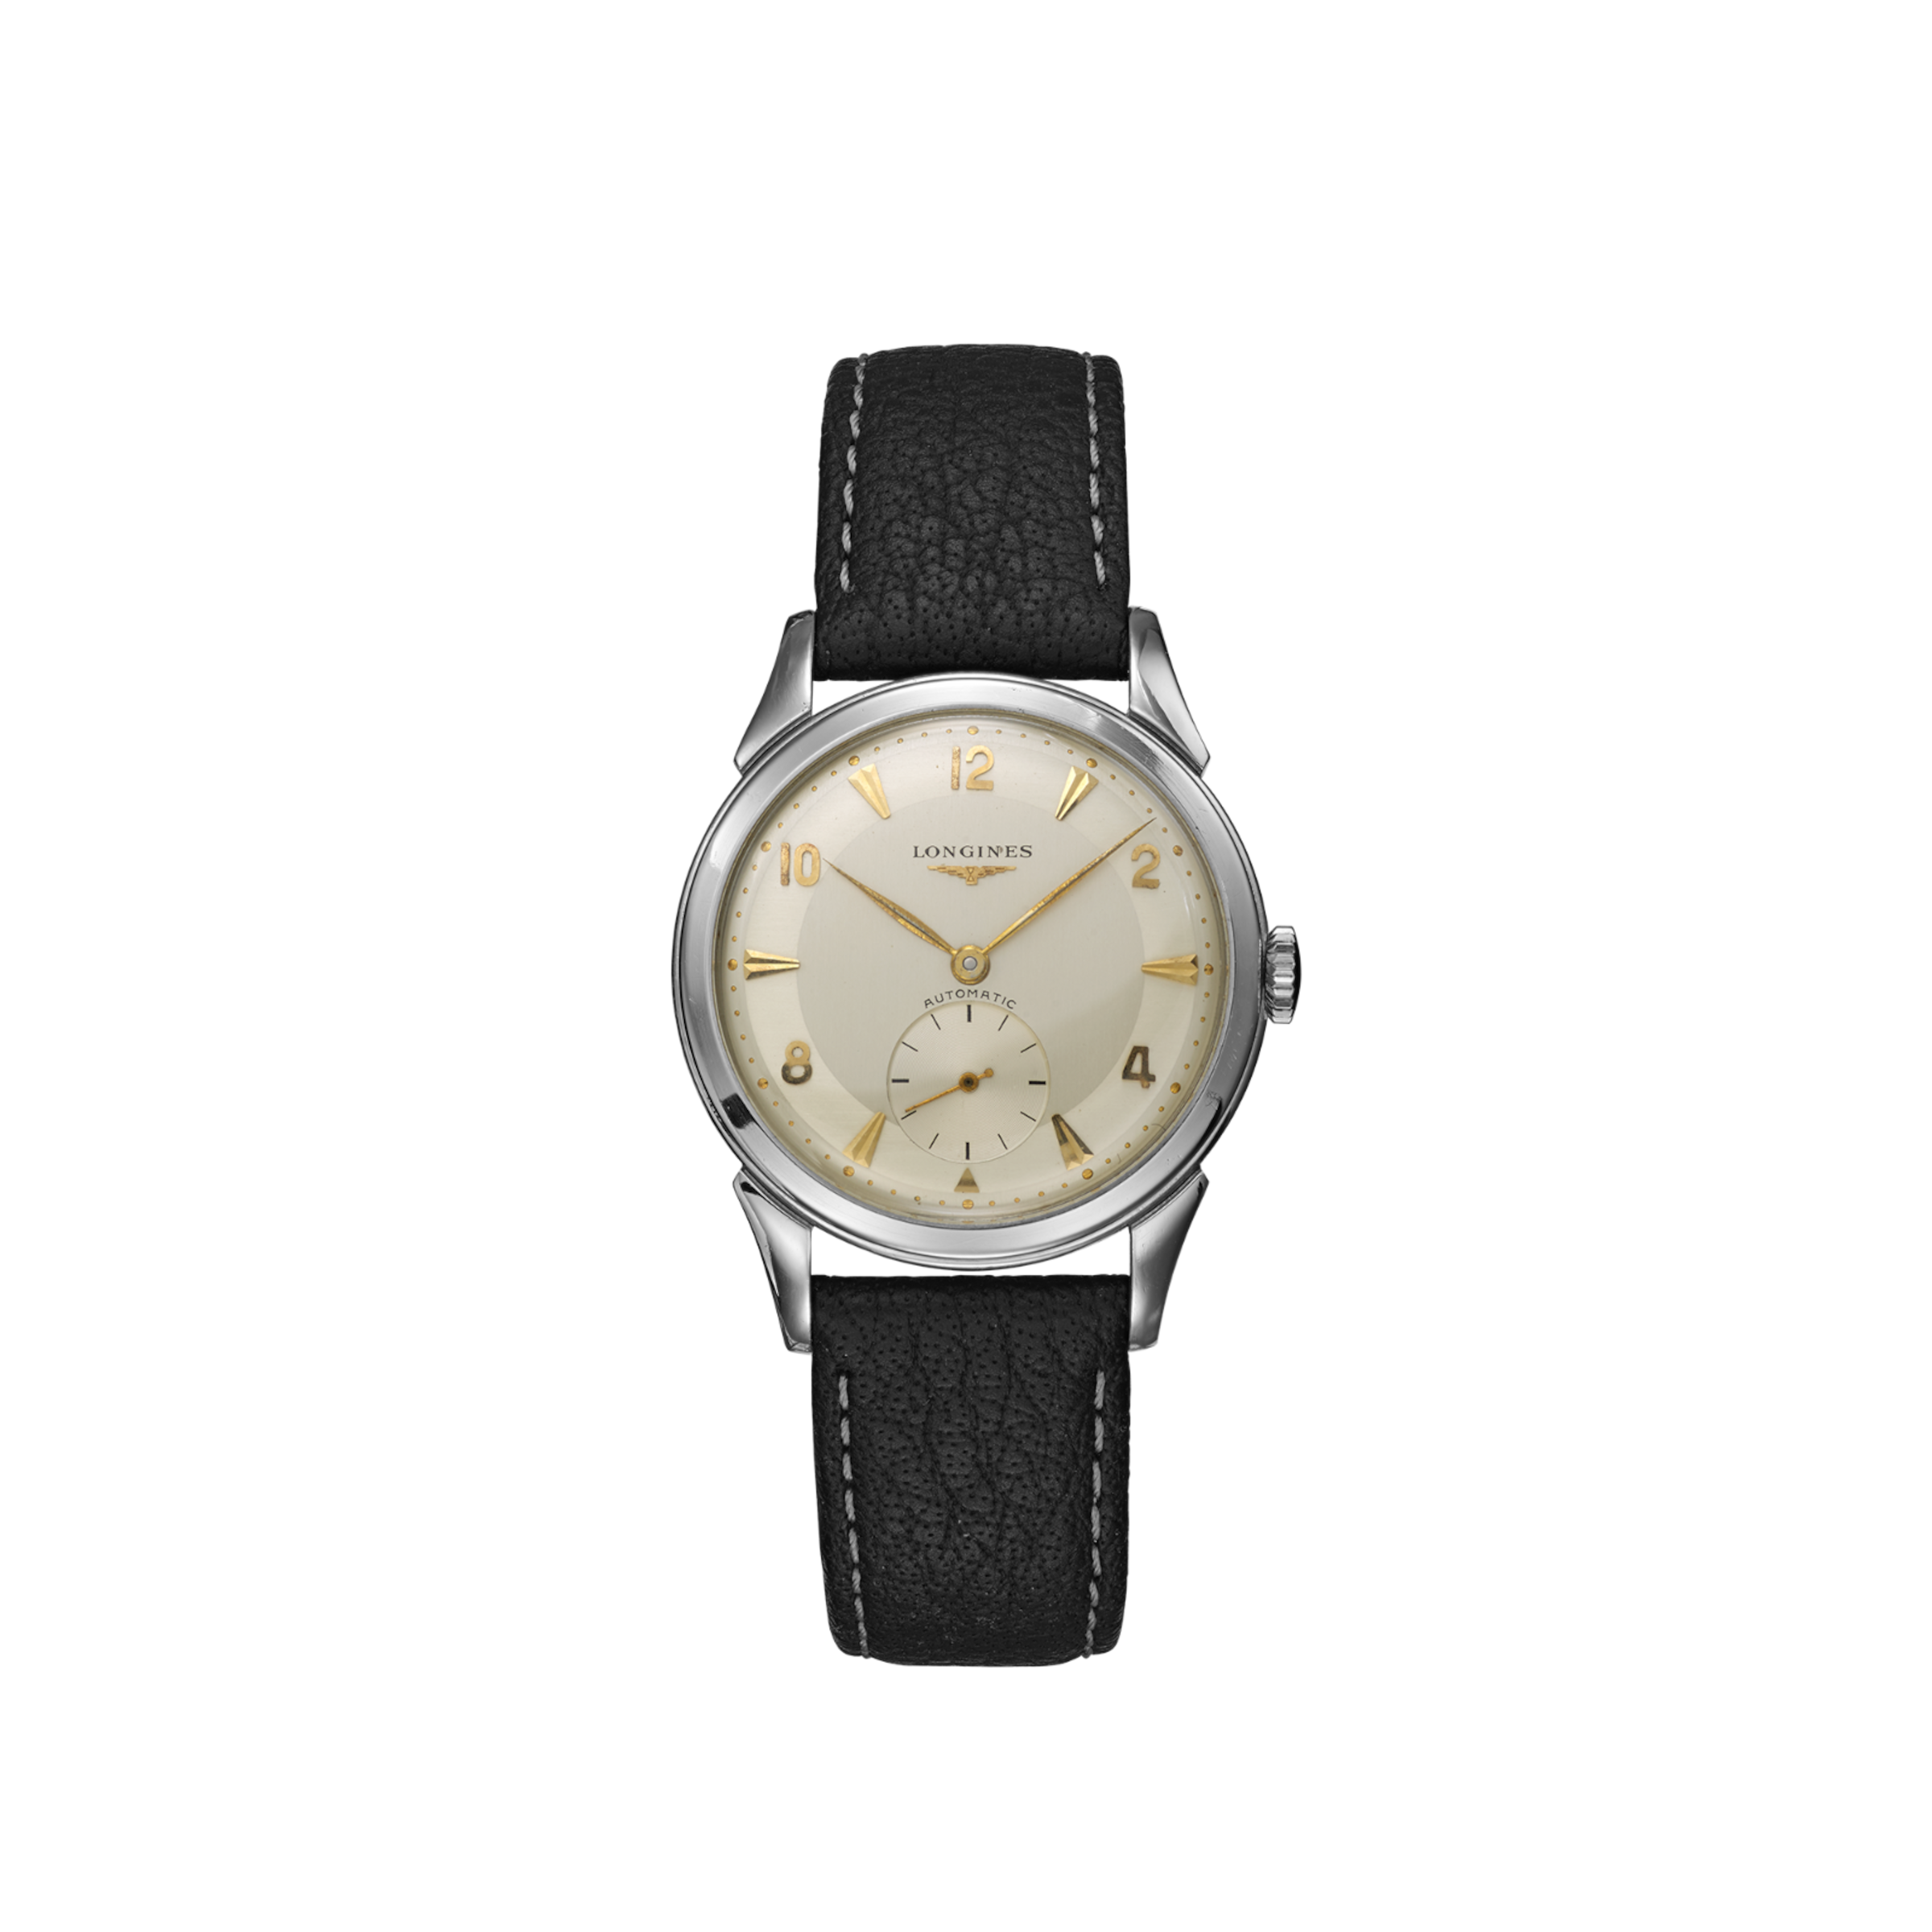 Automatic Longines watch with caliber 22A (1950)